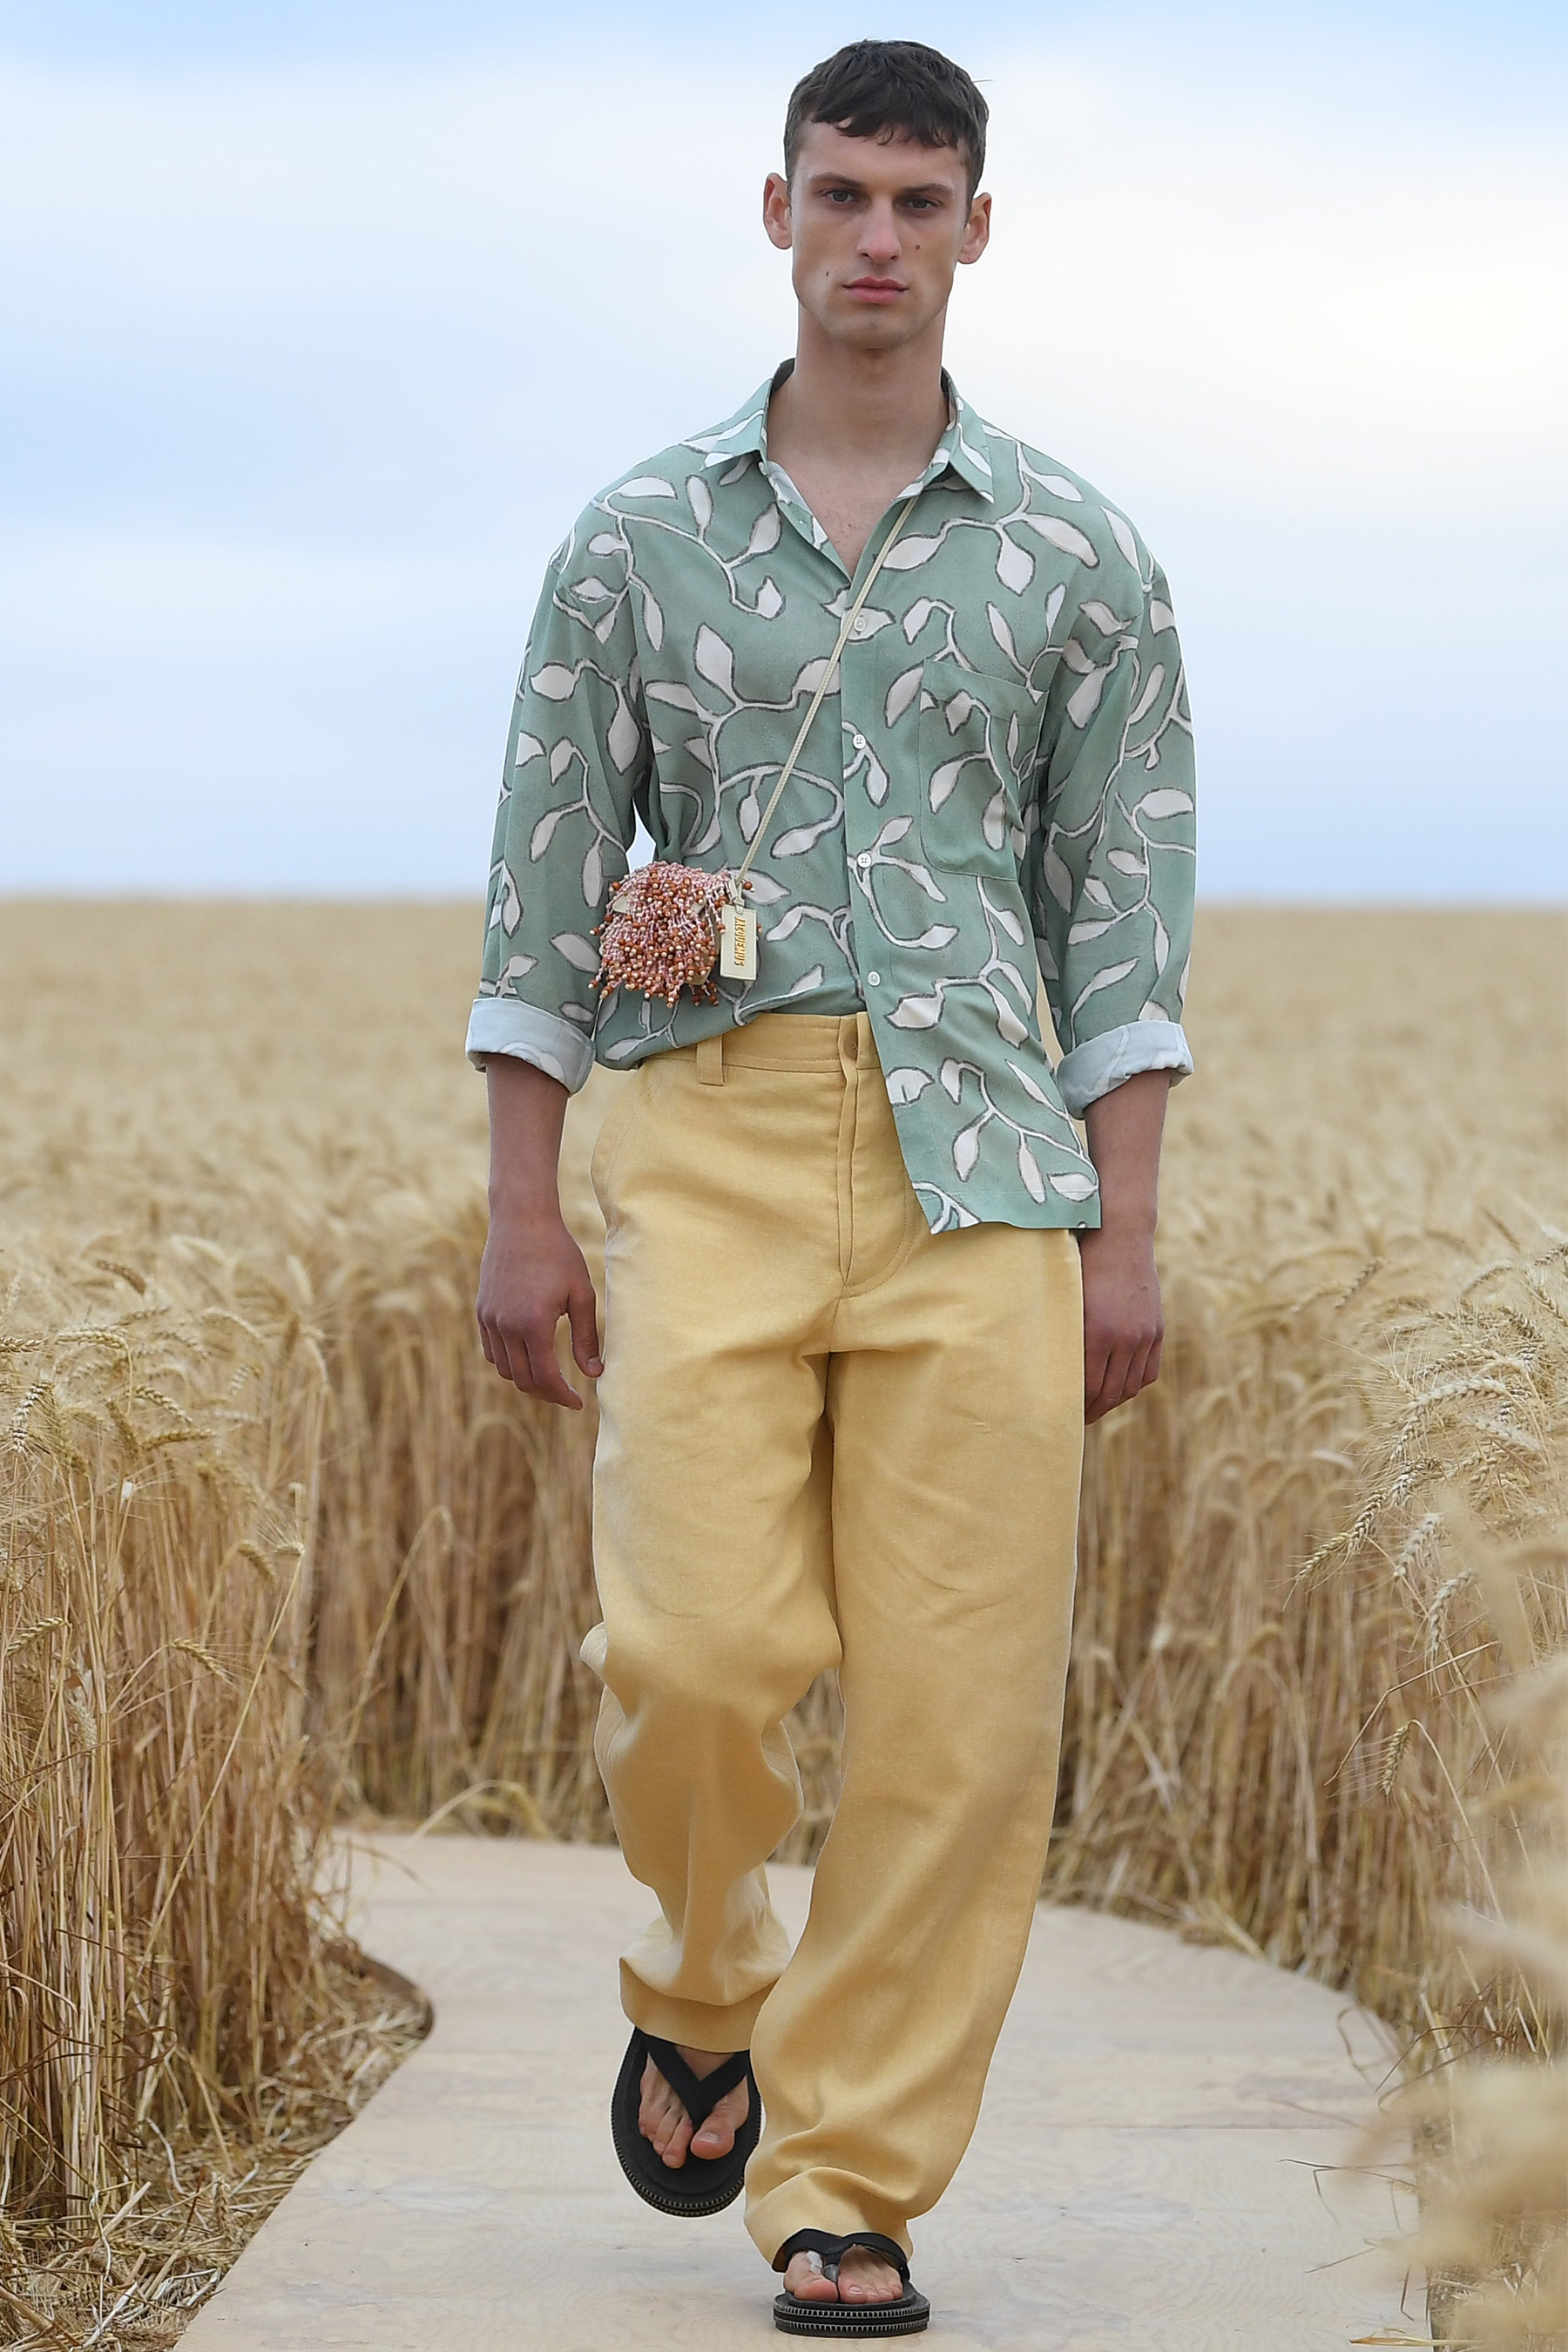 French-Californian styled model wearing baggy trousers a loose patterned button up shirt and flip flops